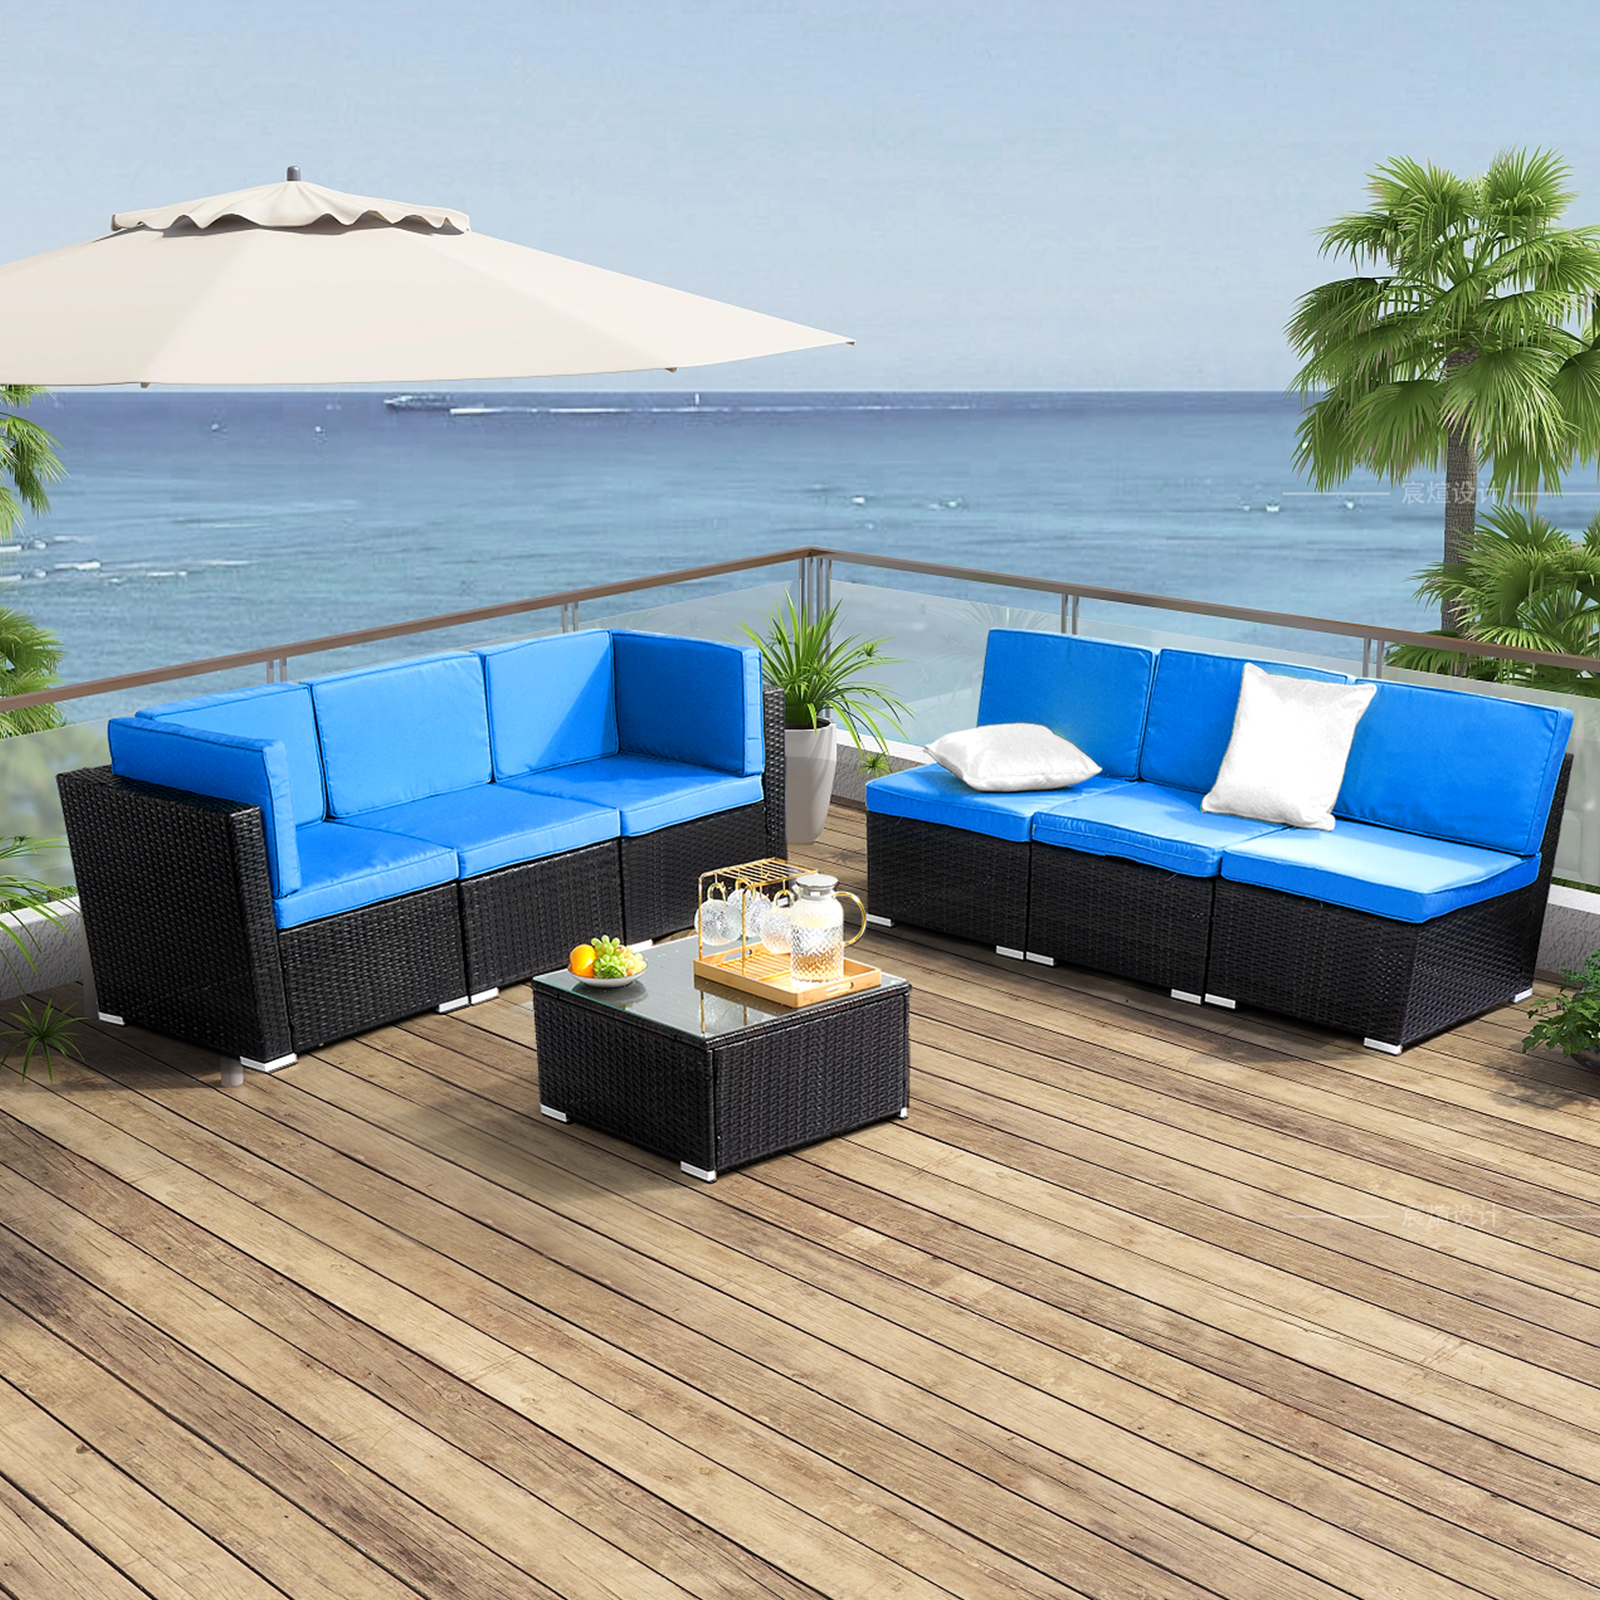 Zimtown 7PCS Outdoor Patio Sectional Set, Wicker Couch Sofa Set, Rattan Conversation Set, All Weather Chat Set for 6 Person, Blue and Black PE Rattan with Table - image 3 of 9